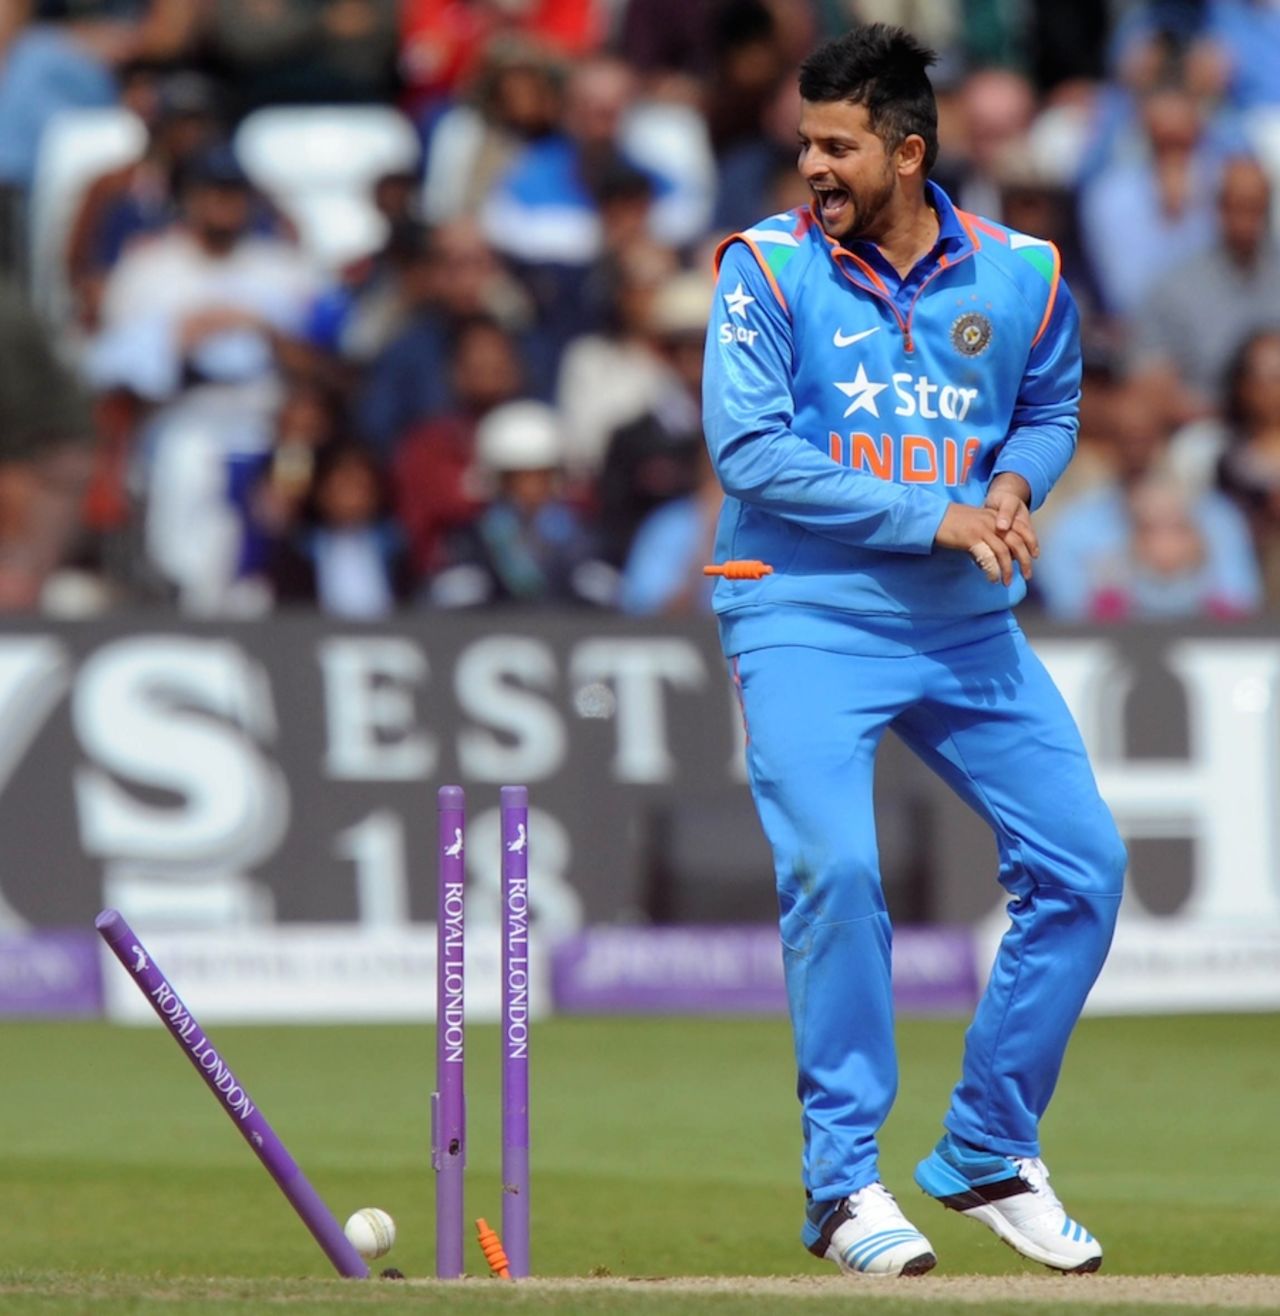 Suresh Raina is pleasantly surprised by the direct hit from Mohit Sharma, England v India, 3rd ODI, Trent Bridge, August 30, 2014